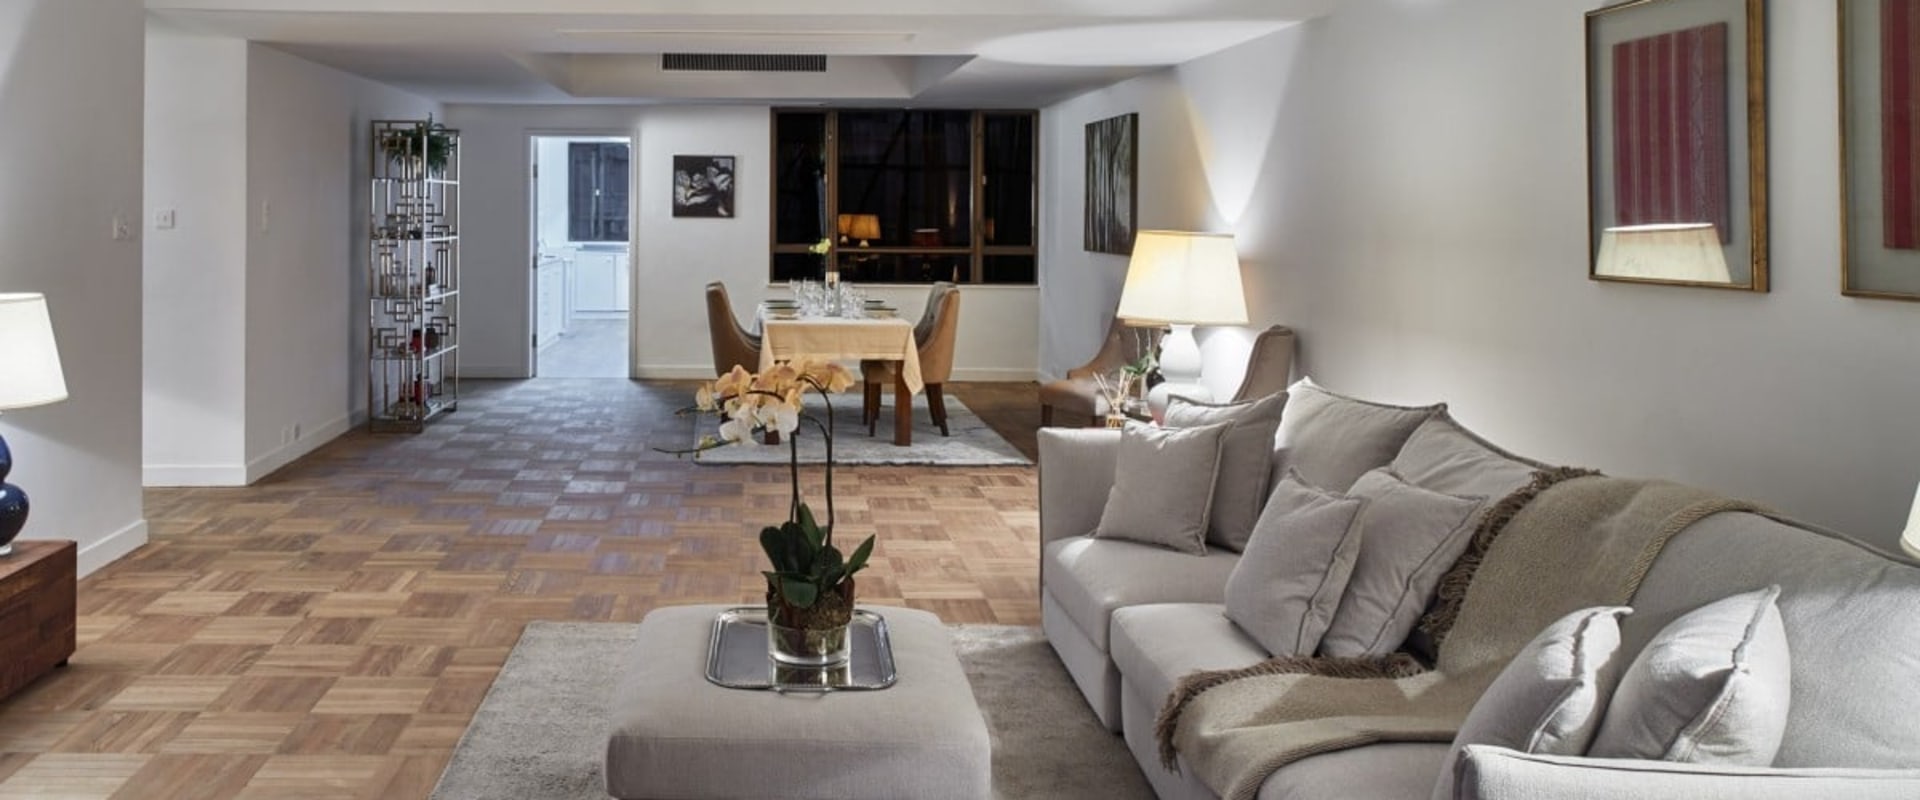 Home Staging: The Key To Selling Your Home Fast In Las Vegas